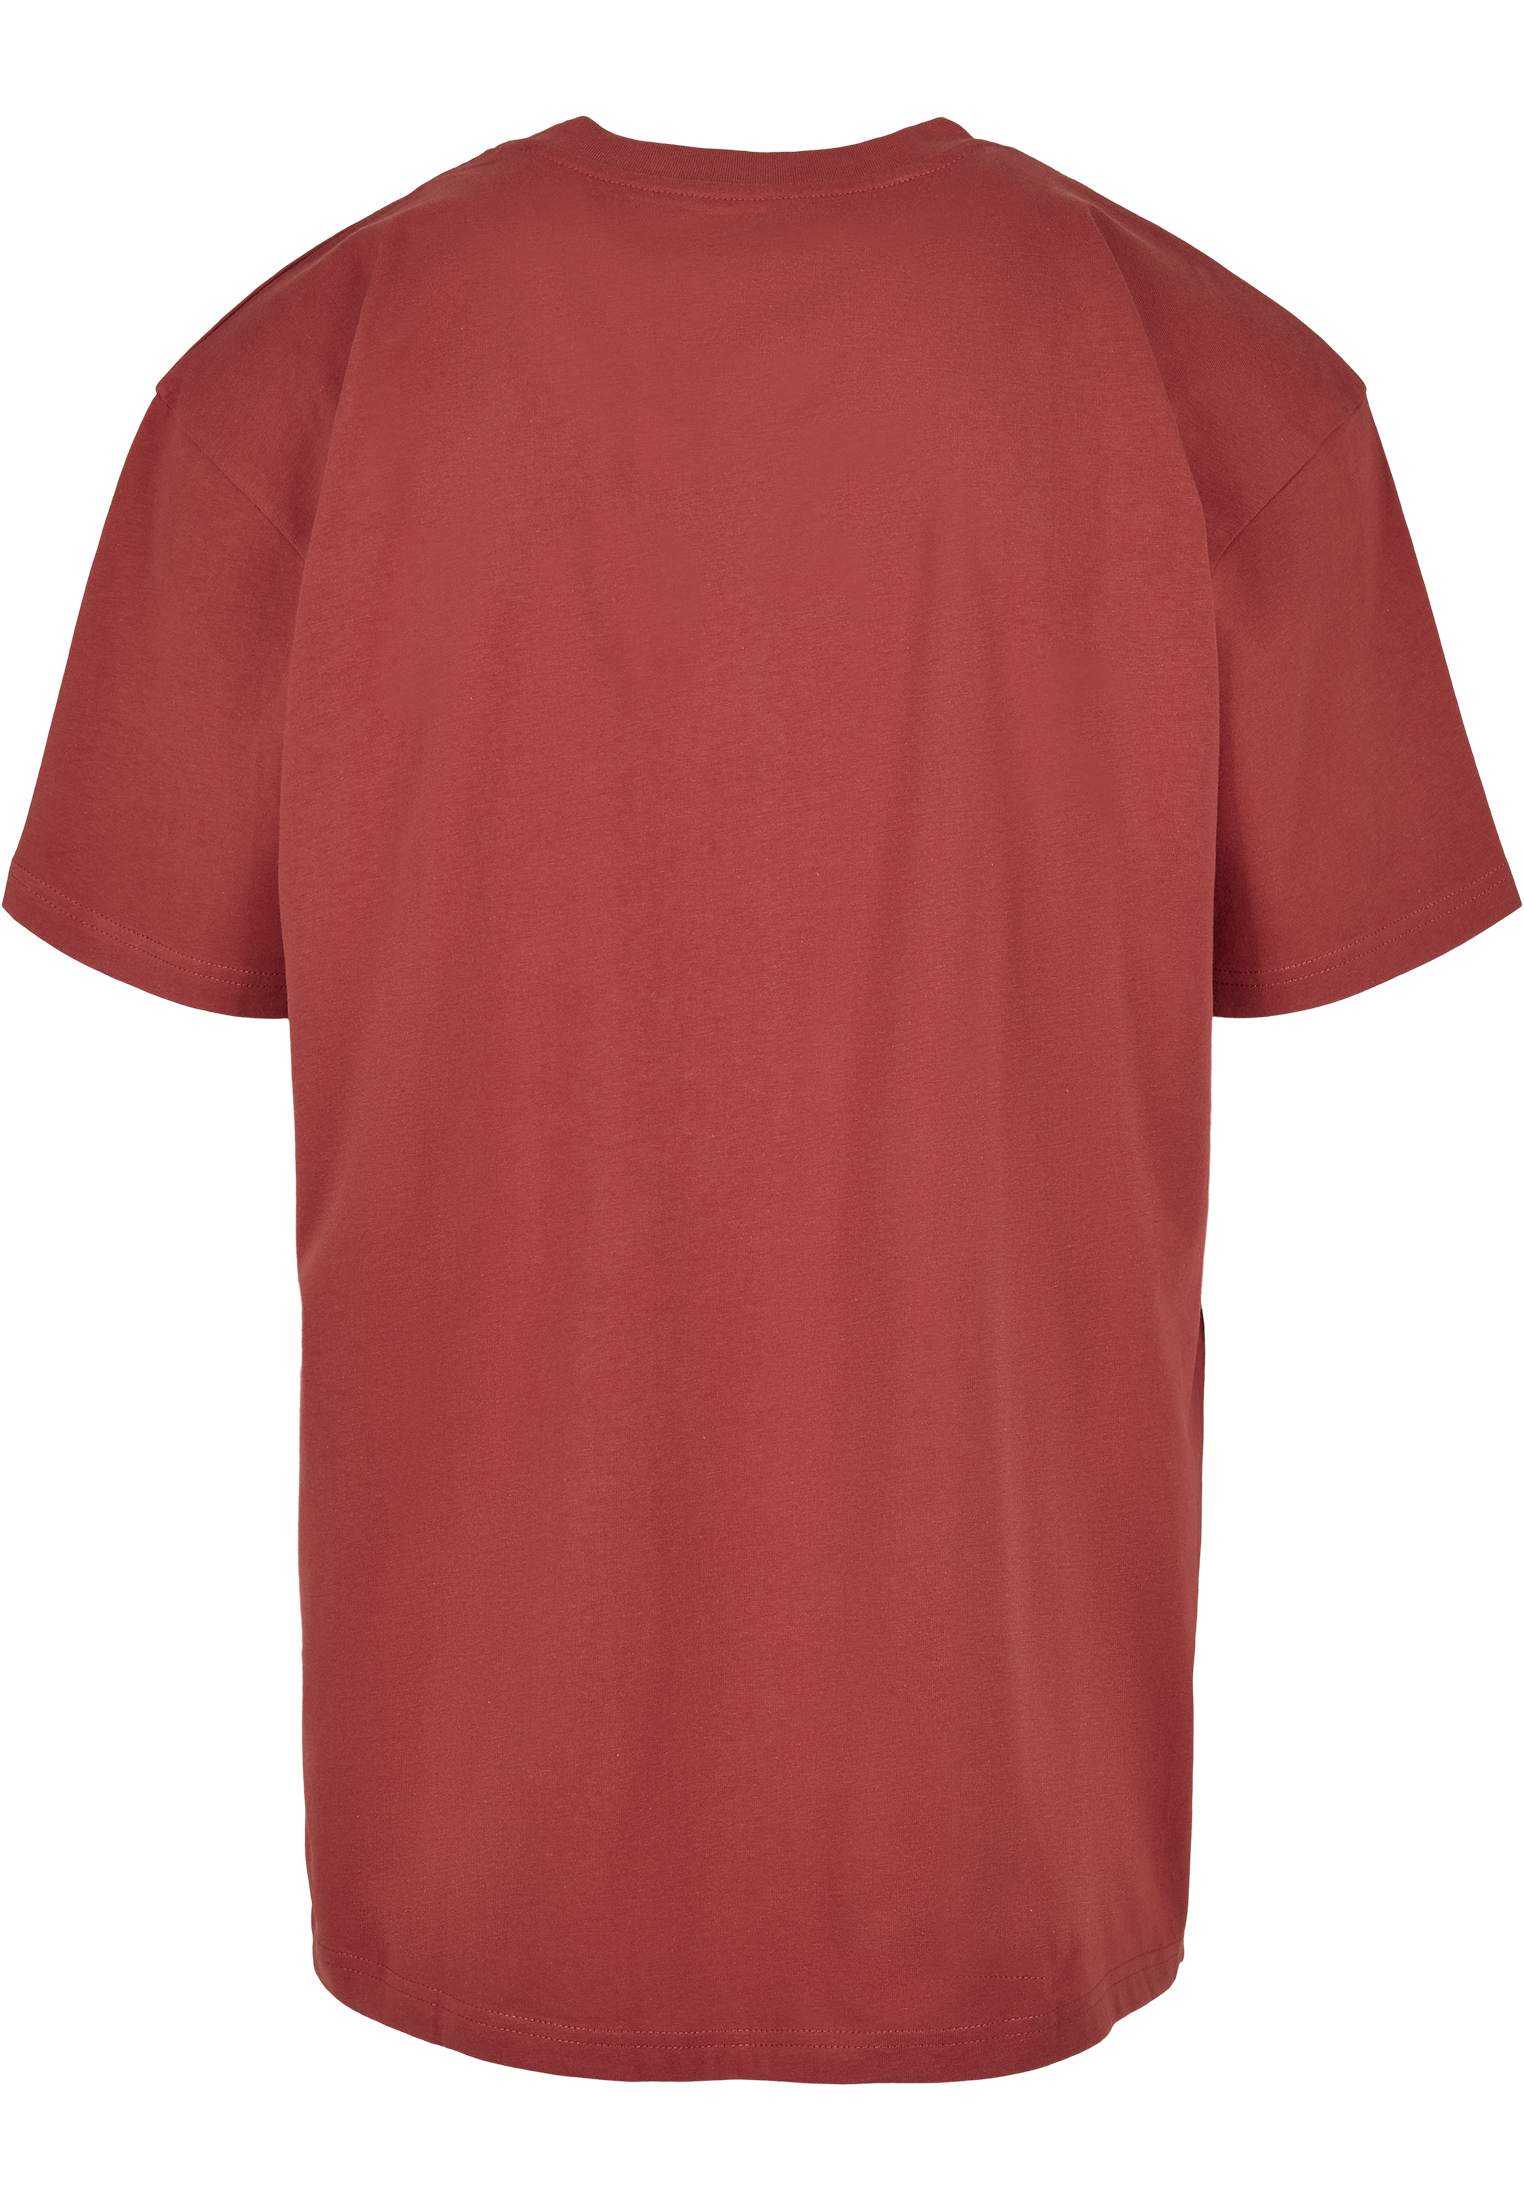 Saisonware Southpole Harlem Tee in Farbe brick red